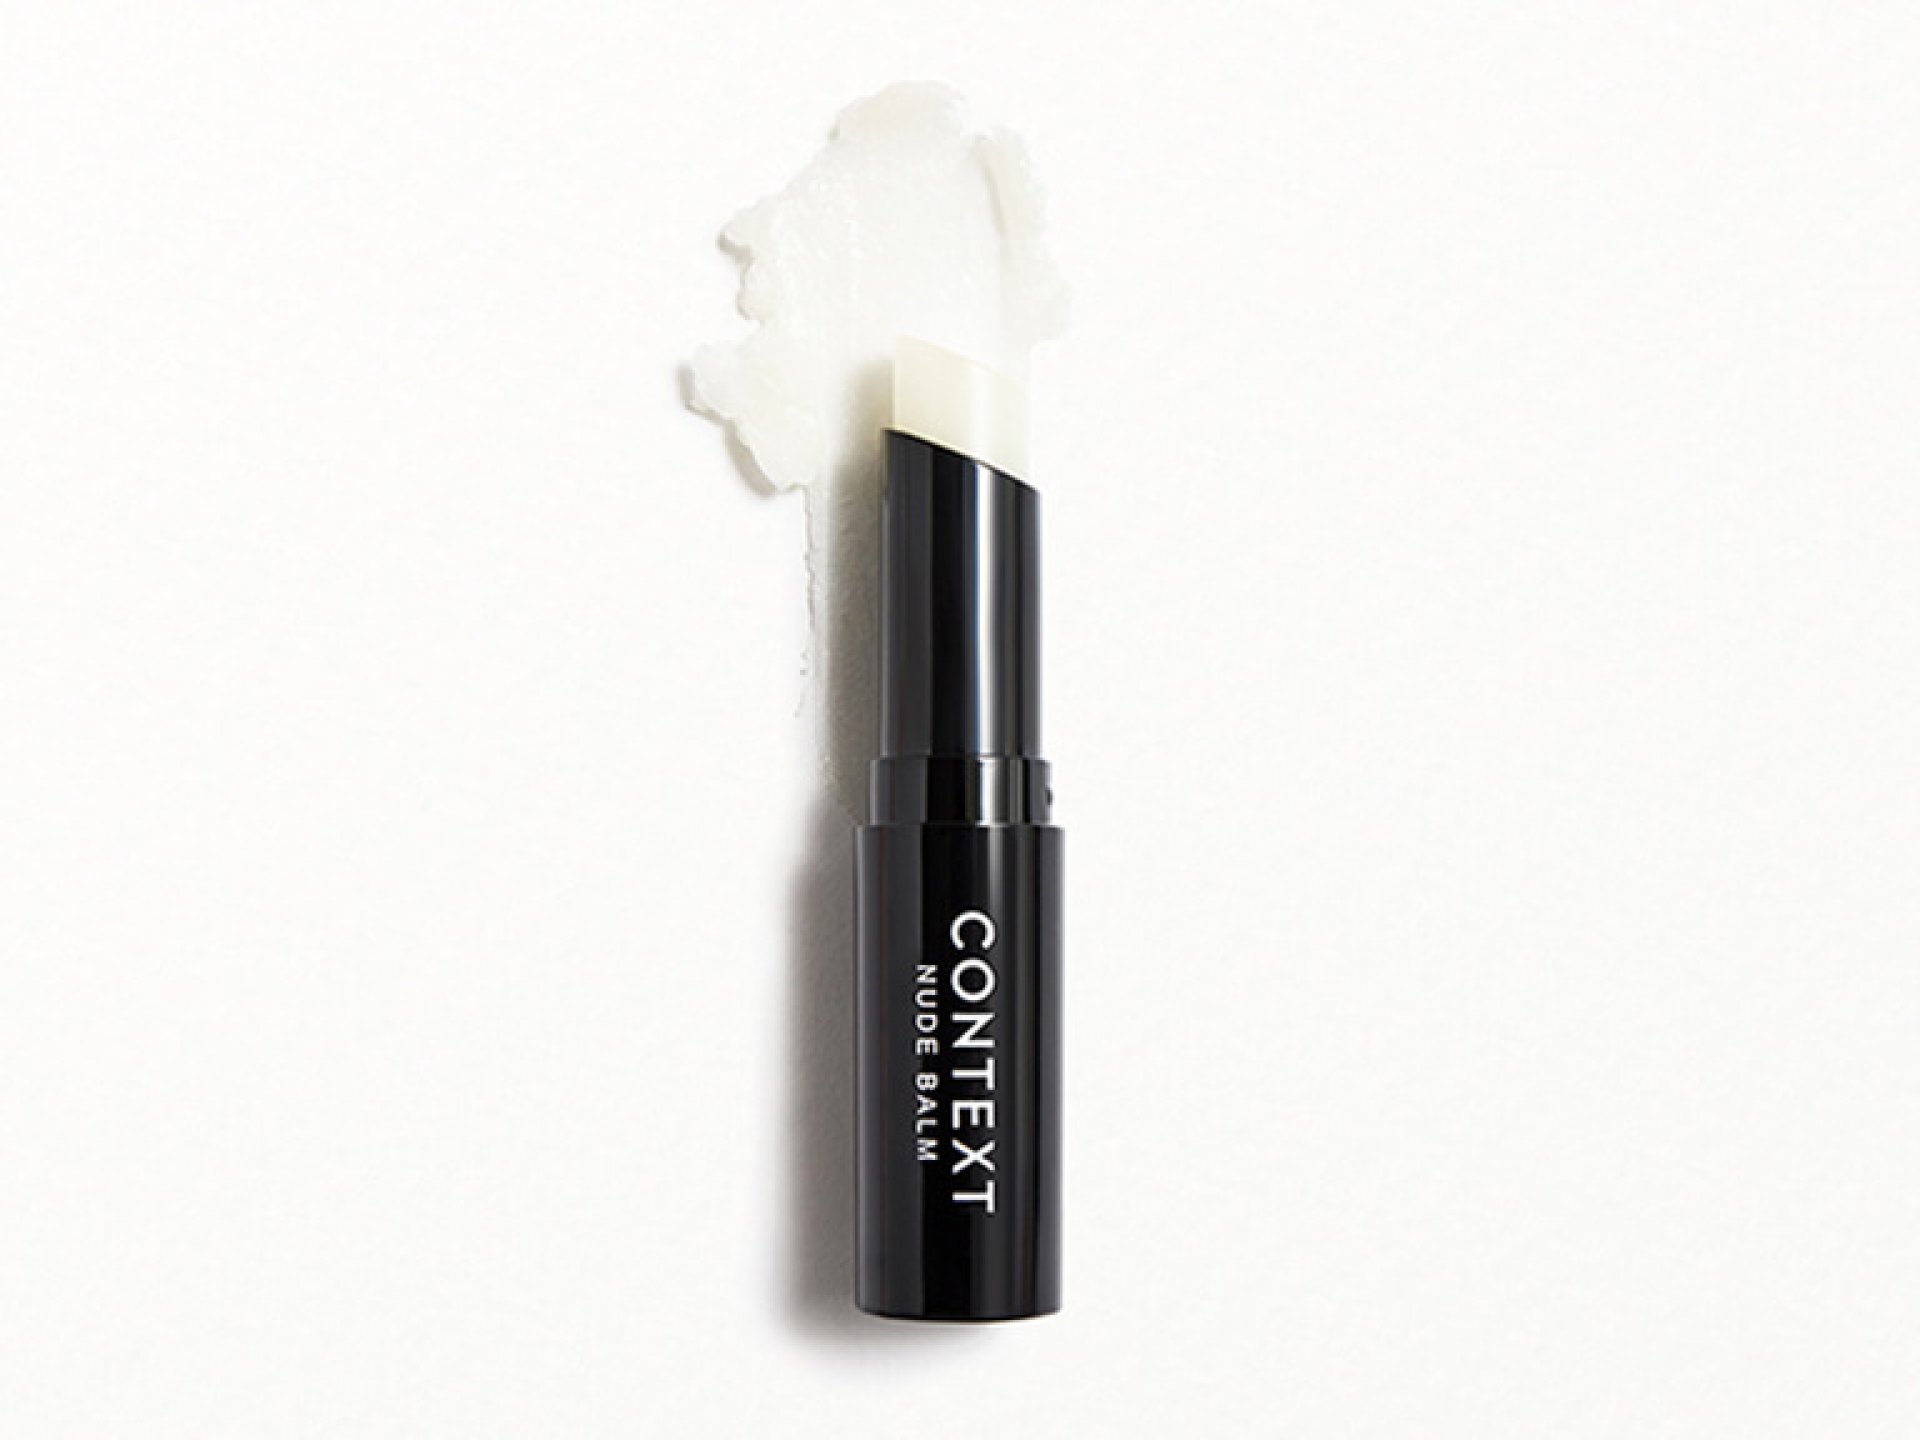 CONTEXT SKIN Nude Balm in CLEAR MATTE